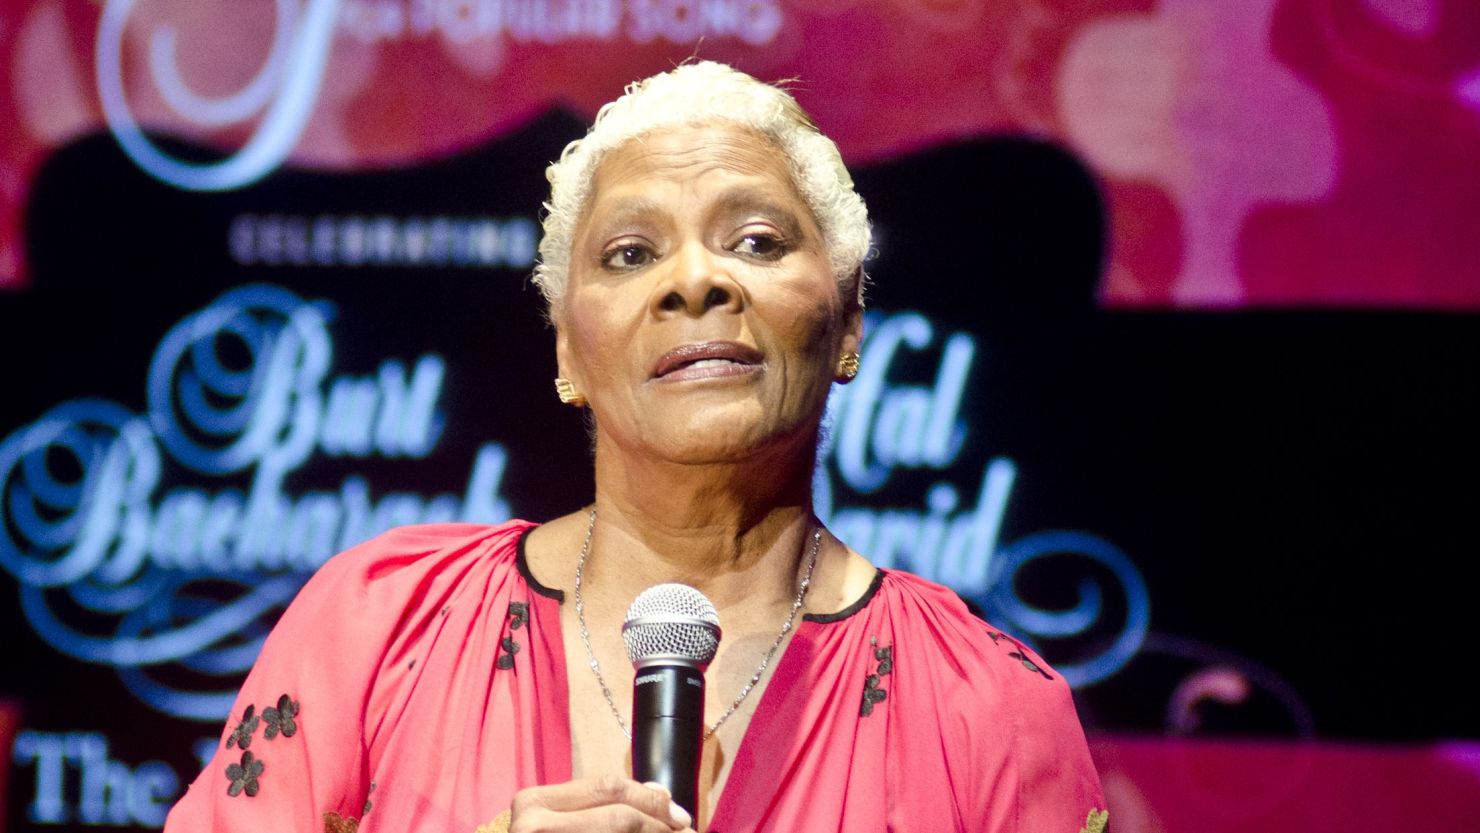 Dionne Warwick is down to her last $1,000 in cash.